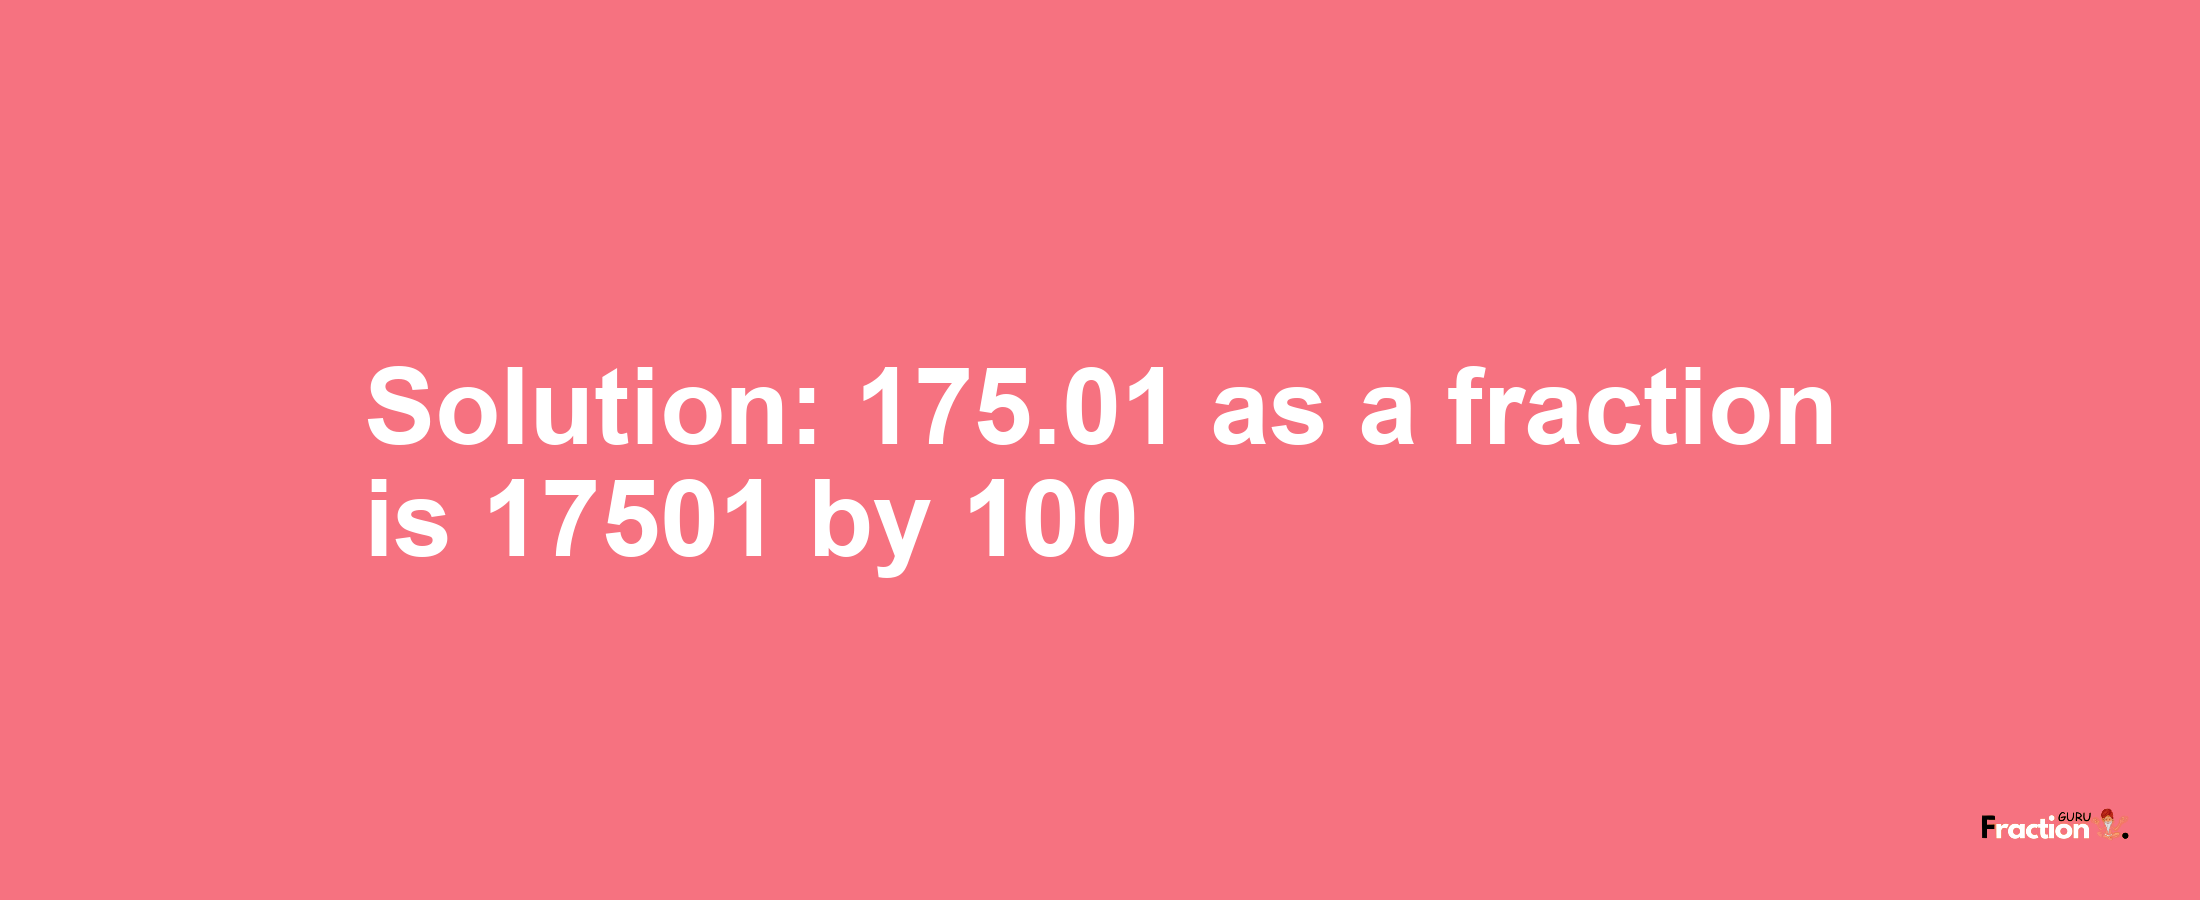 Solution:175.01 as a fraction is 17501/100